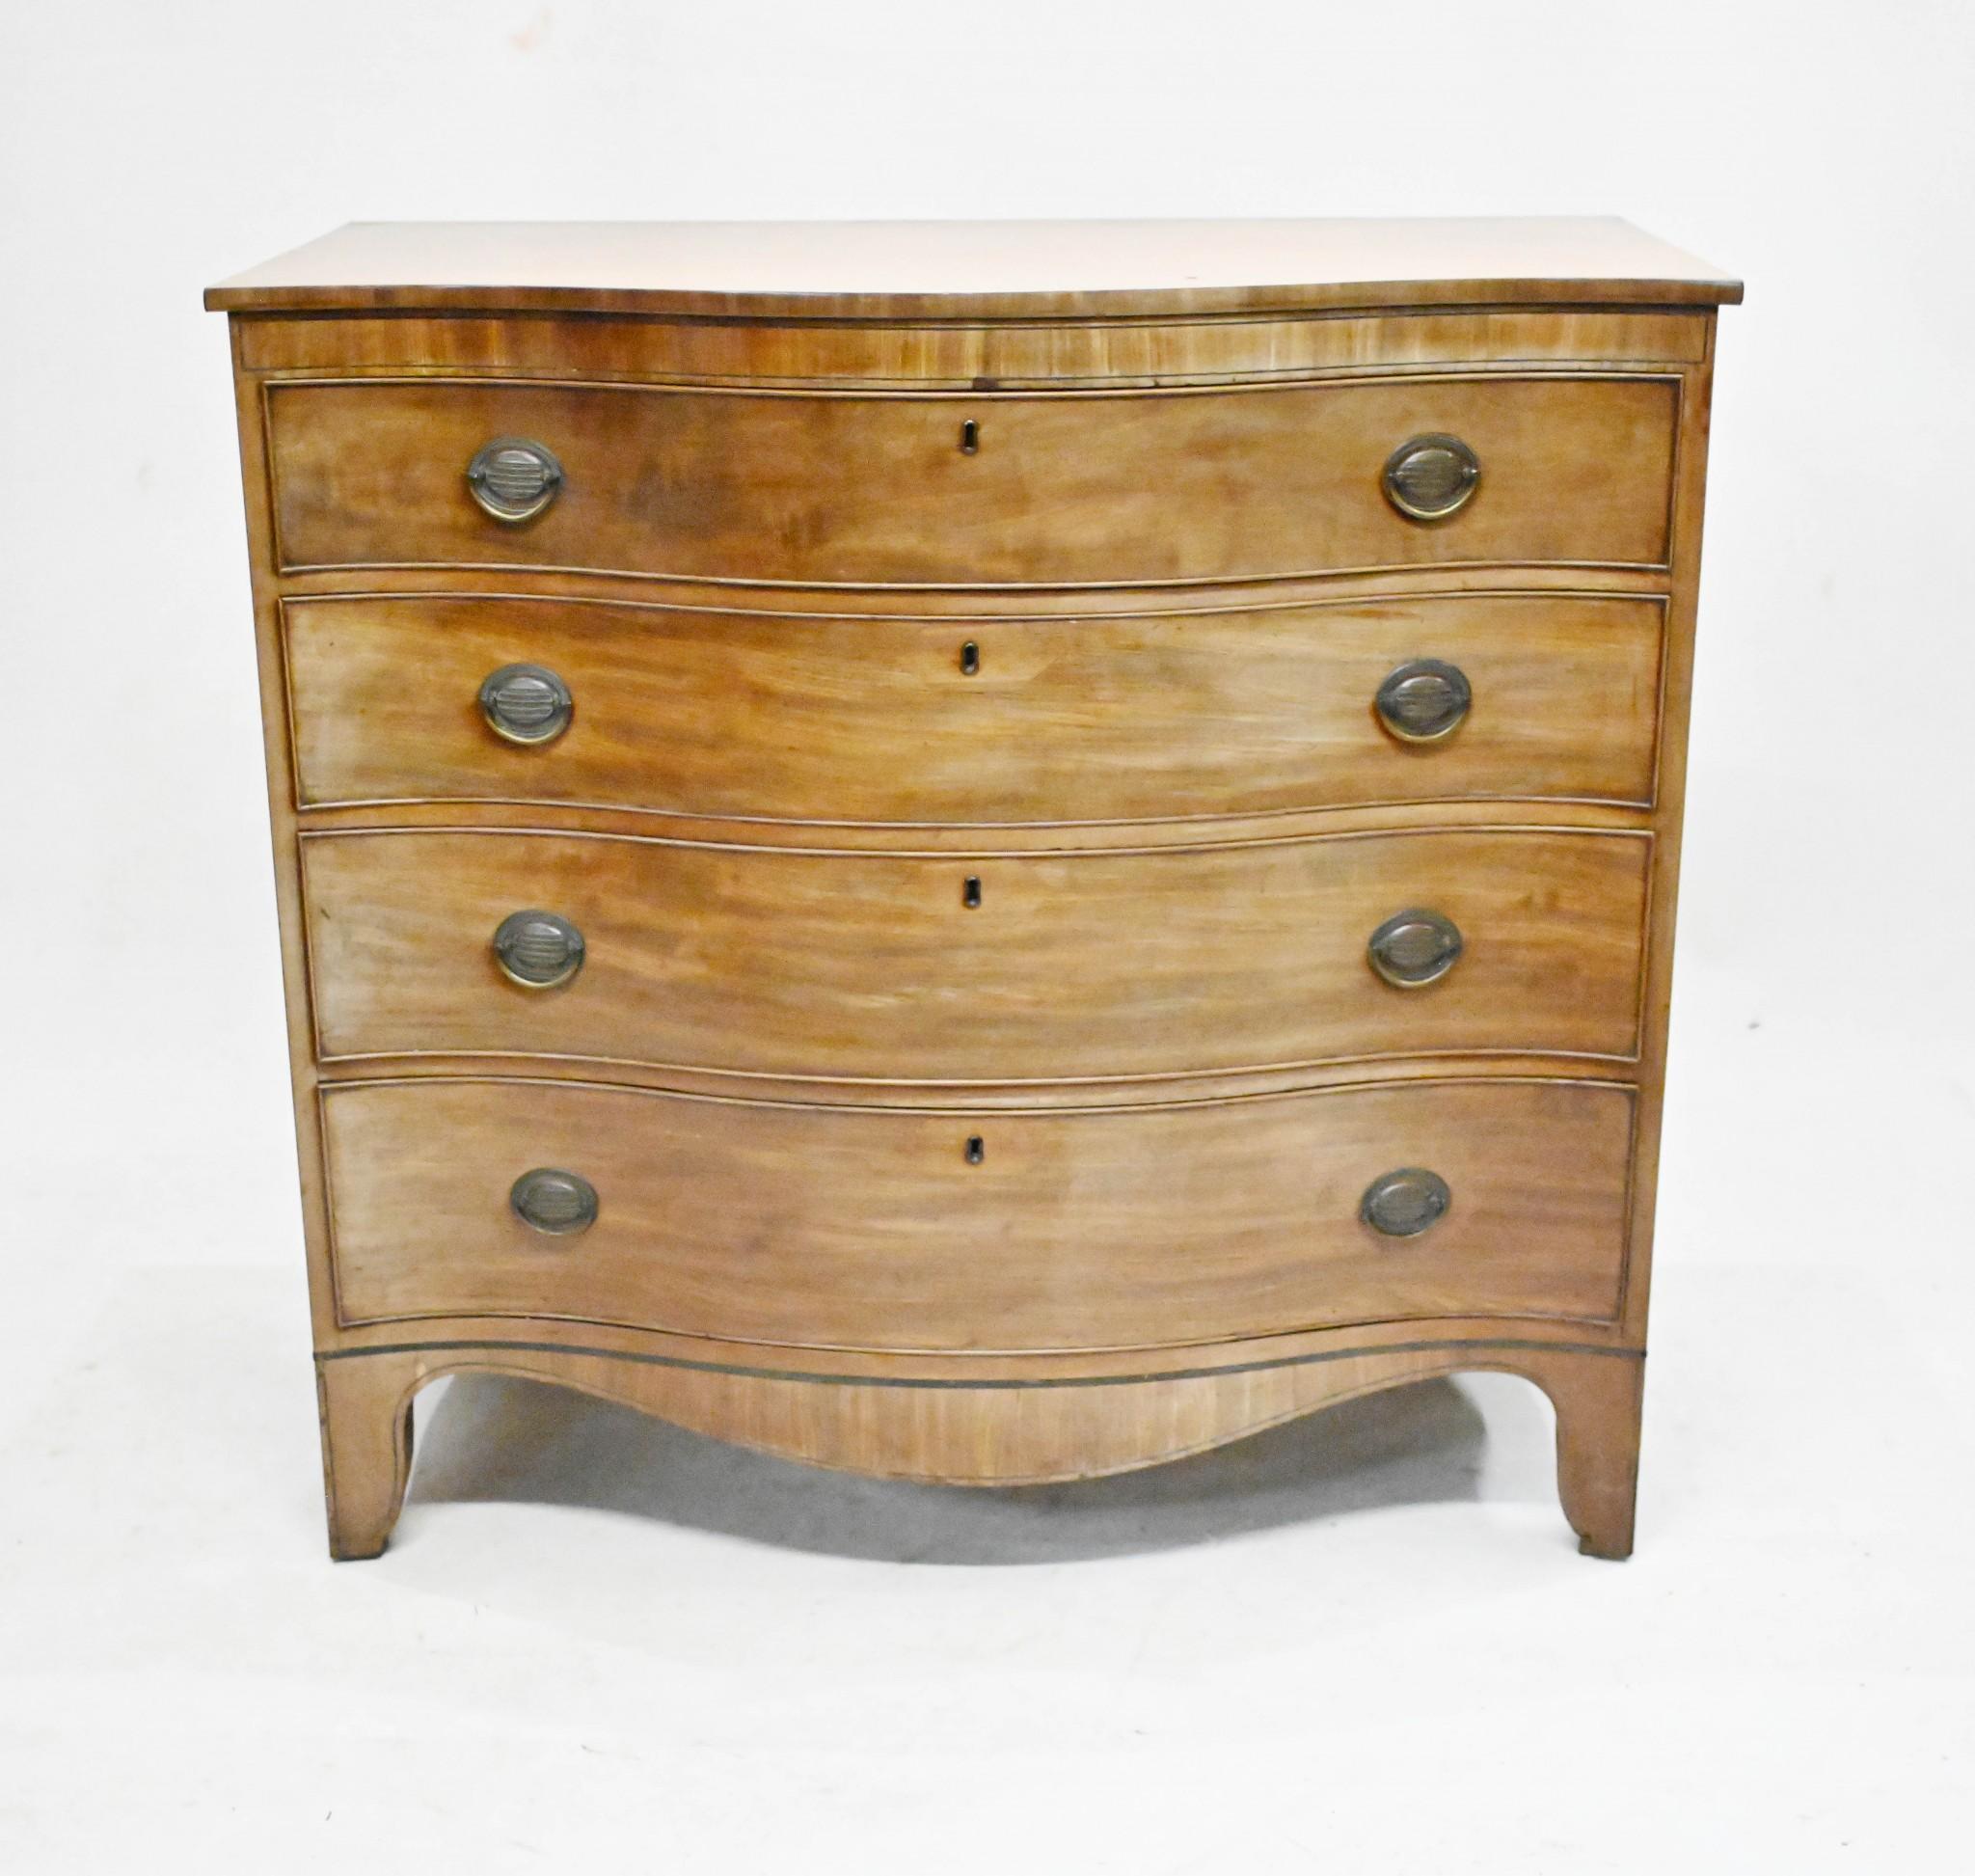 Gorgeous antique chest of drawers after Sheraton
Featues a serpentine form and four drawers so ample storge
We date this piece to circa 1810 and it's wonderful example of antique English furniture
Features original handles and bracket feet
Offered